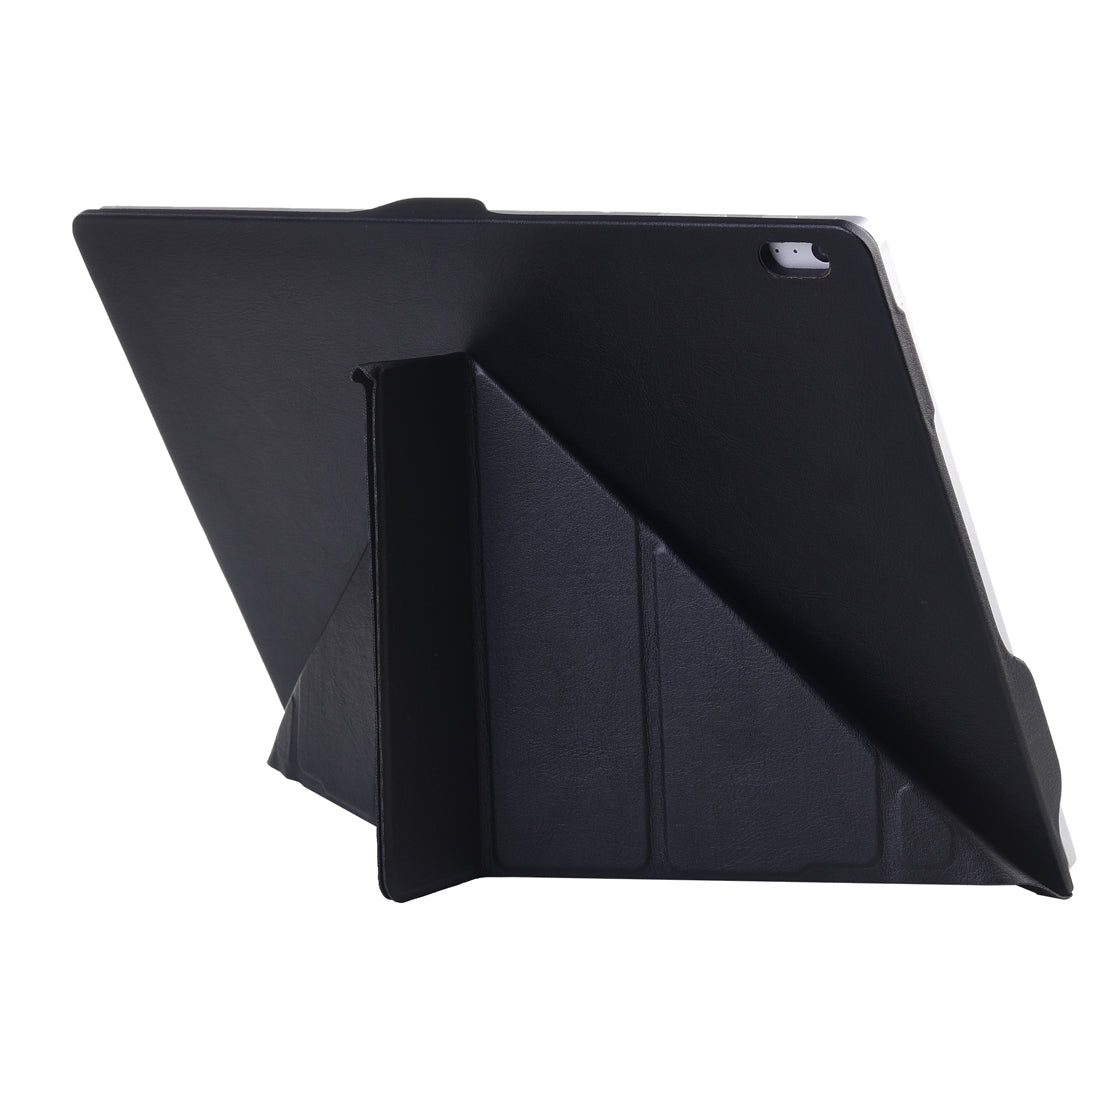 Microsoft Surface Book 3/2 13.5" Leather Case